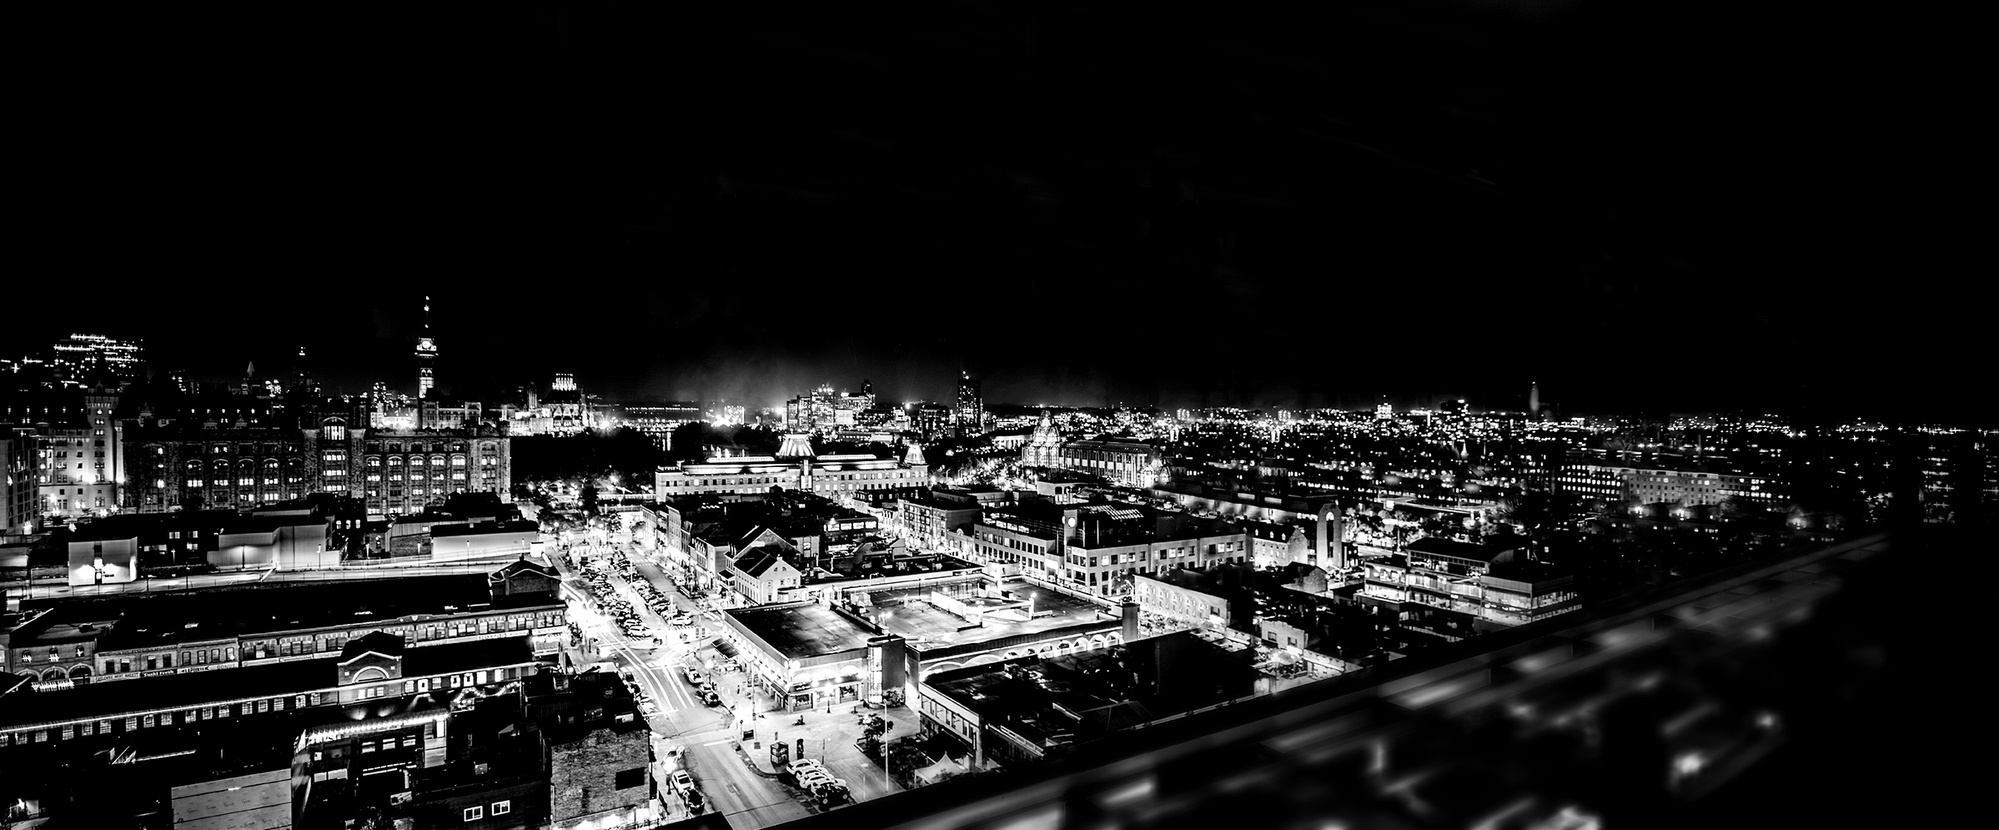 Ottawa's Byward Market photographed at night from Andaz rooftop bar by Architectural Photographer Frank Fenn IDEA3